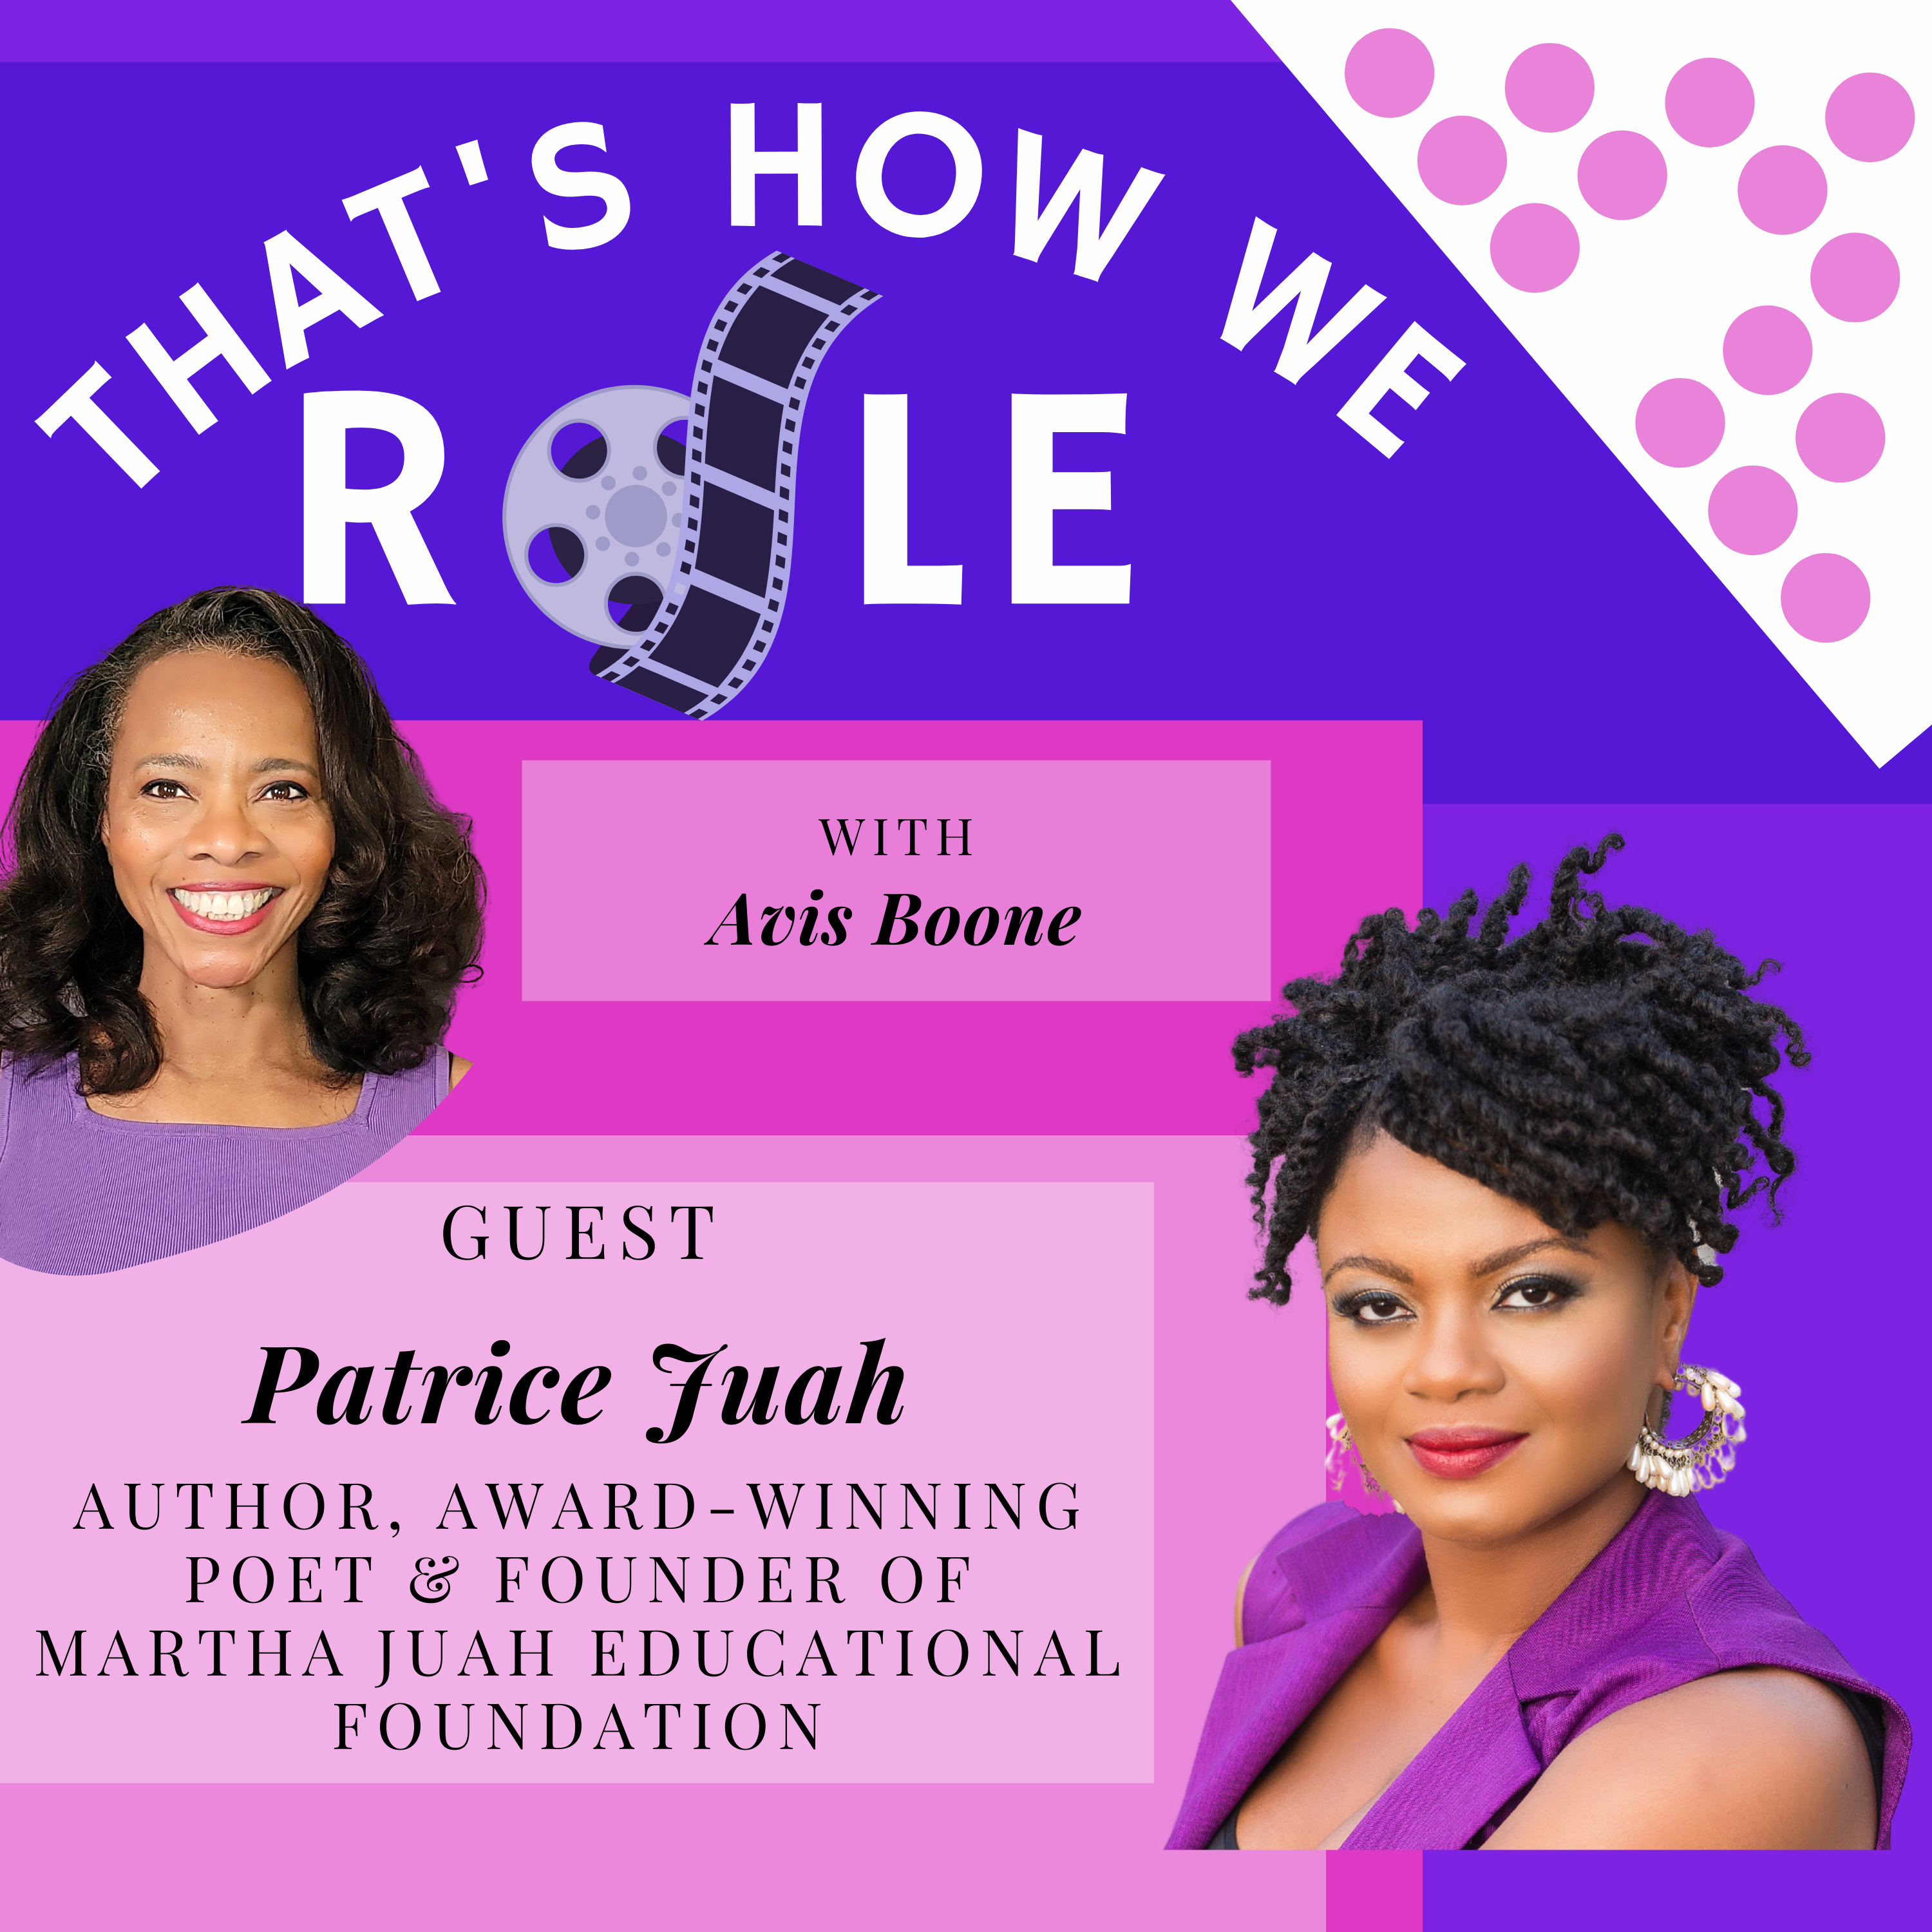 Episode 13: Create Your Own Blueprint with Author, Award-Winning Poet & Founder of the Martha Juah Educational Foundation, Patrice Juah